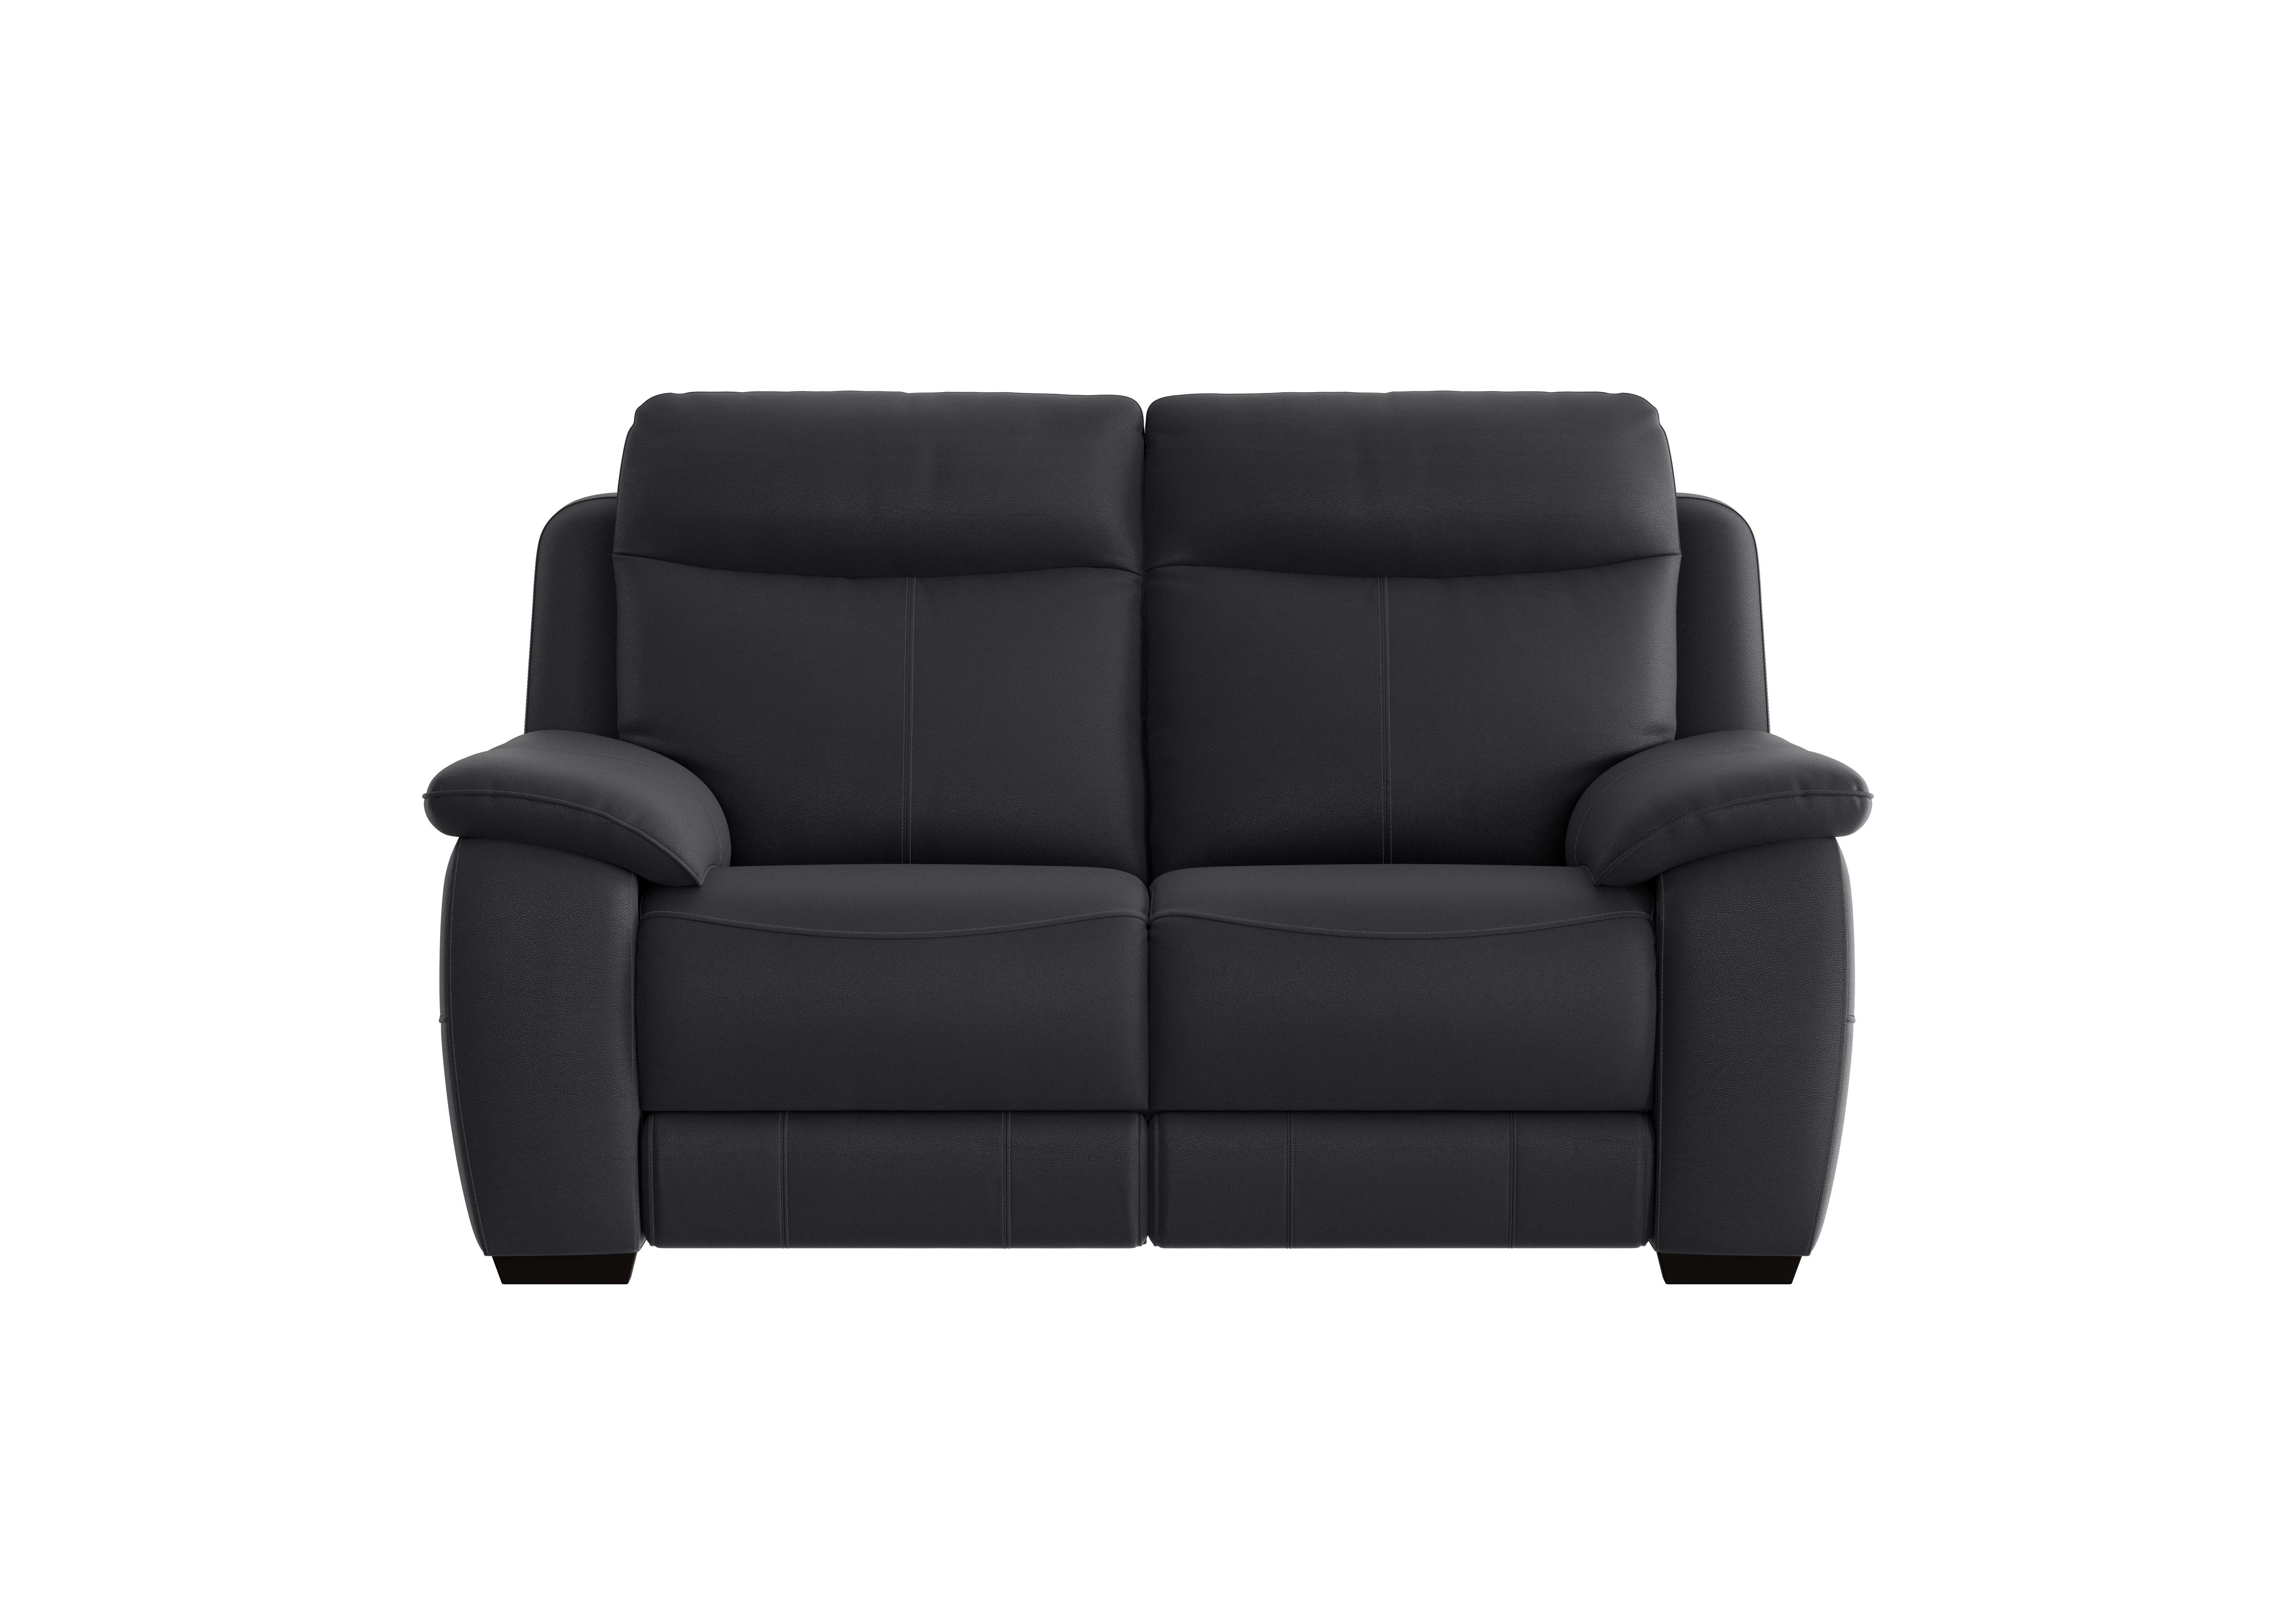 Starlight Express 2 Seater Leather Sofa in Bv-3500 Classic Black on Furniture Village